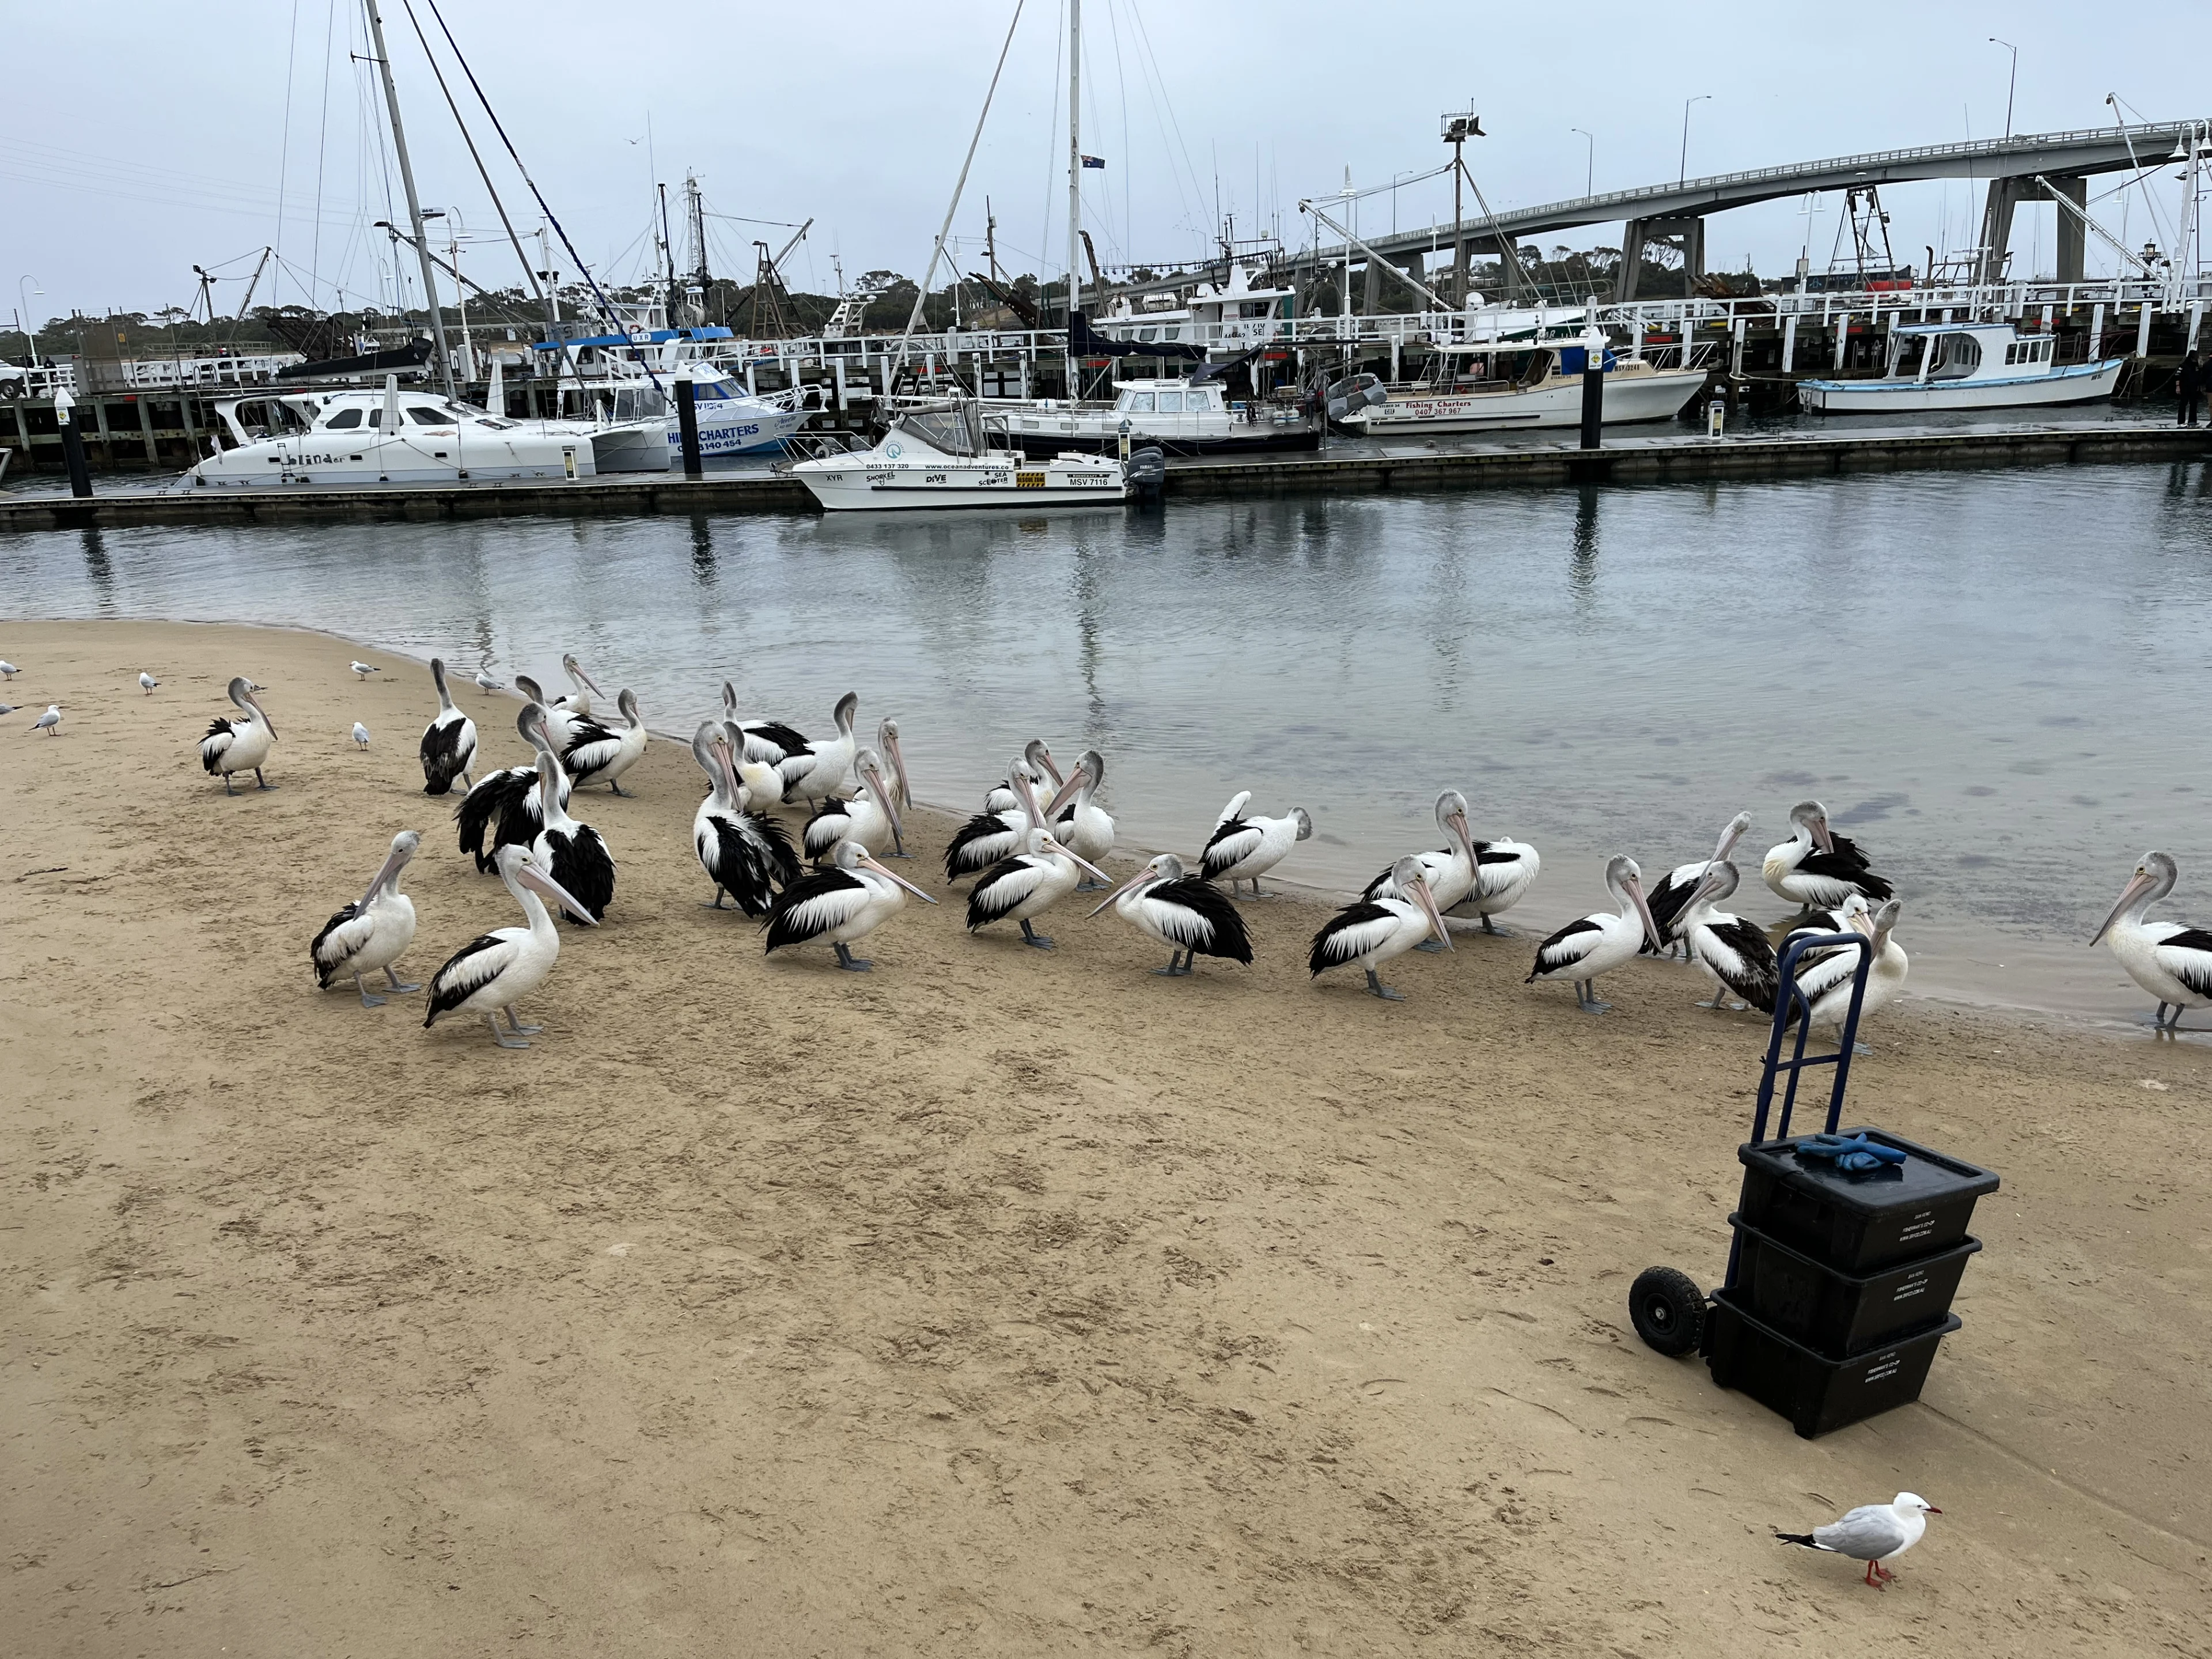 Pelicans at the daily feed and health check at San Remo beach. San Remo, Victoria.